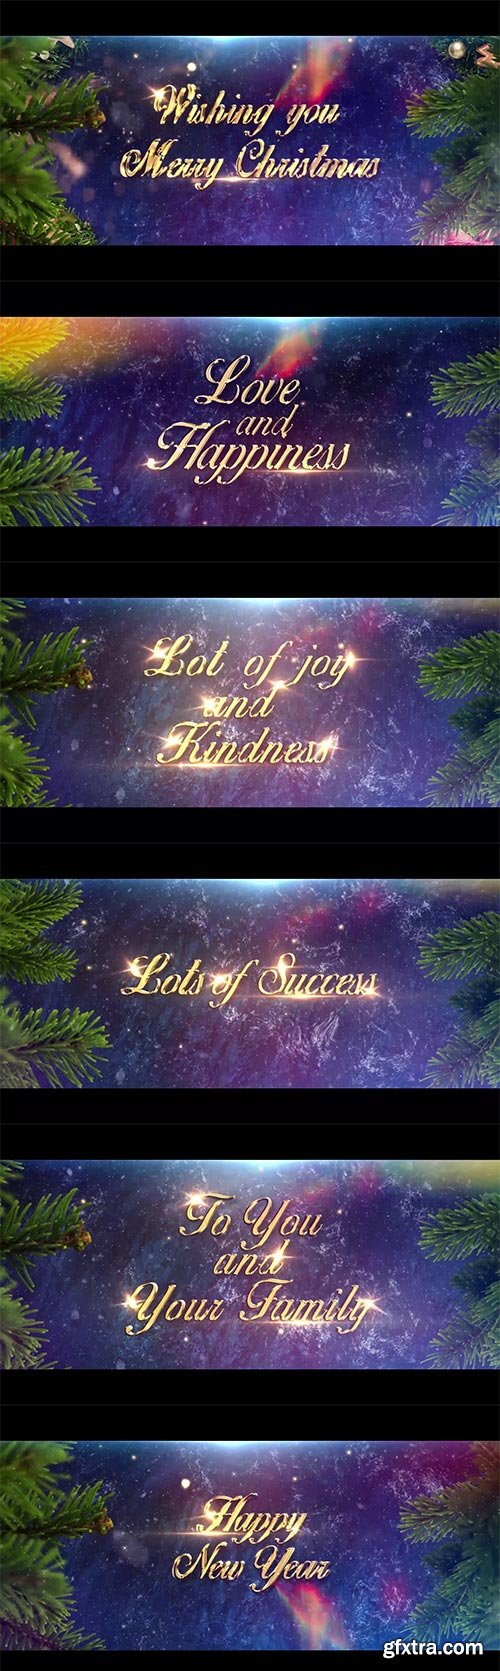 Videohive - Christmas Wishes - 22831013